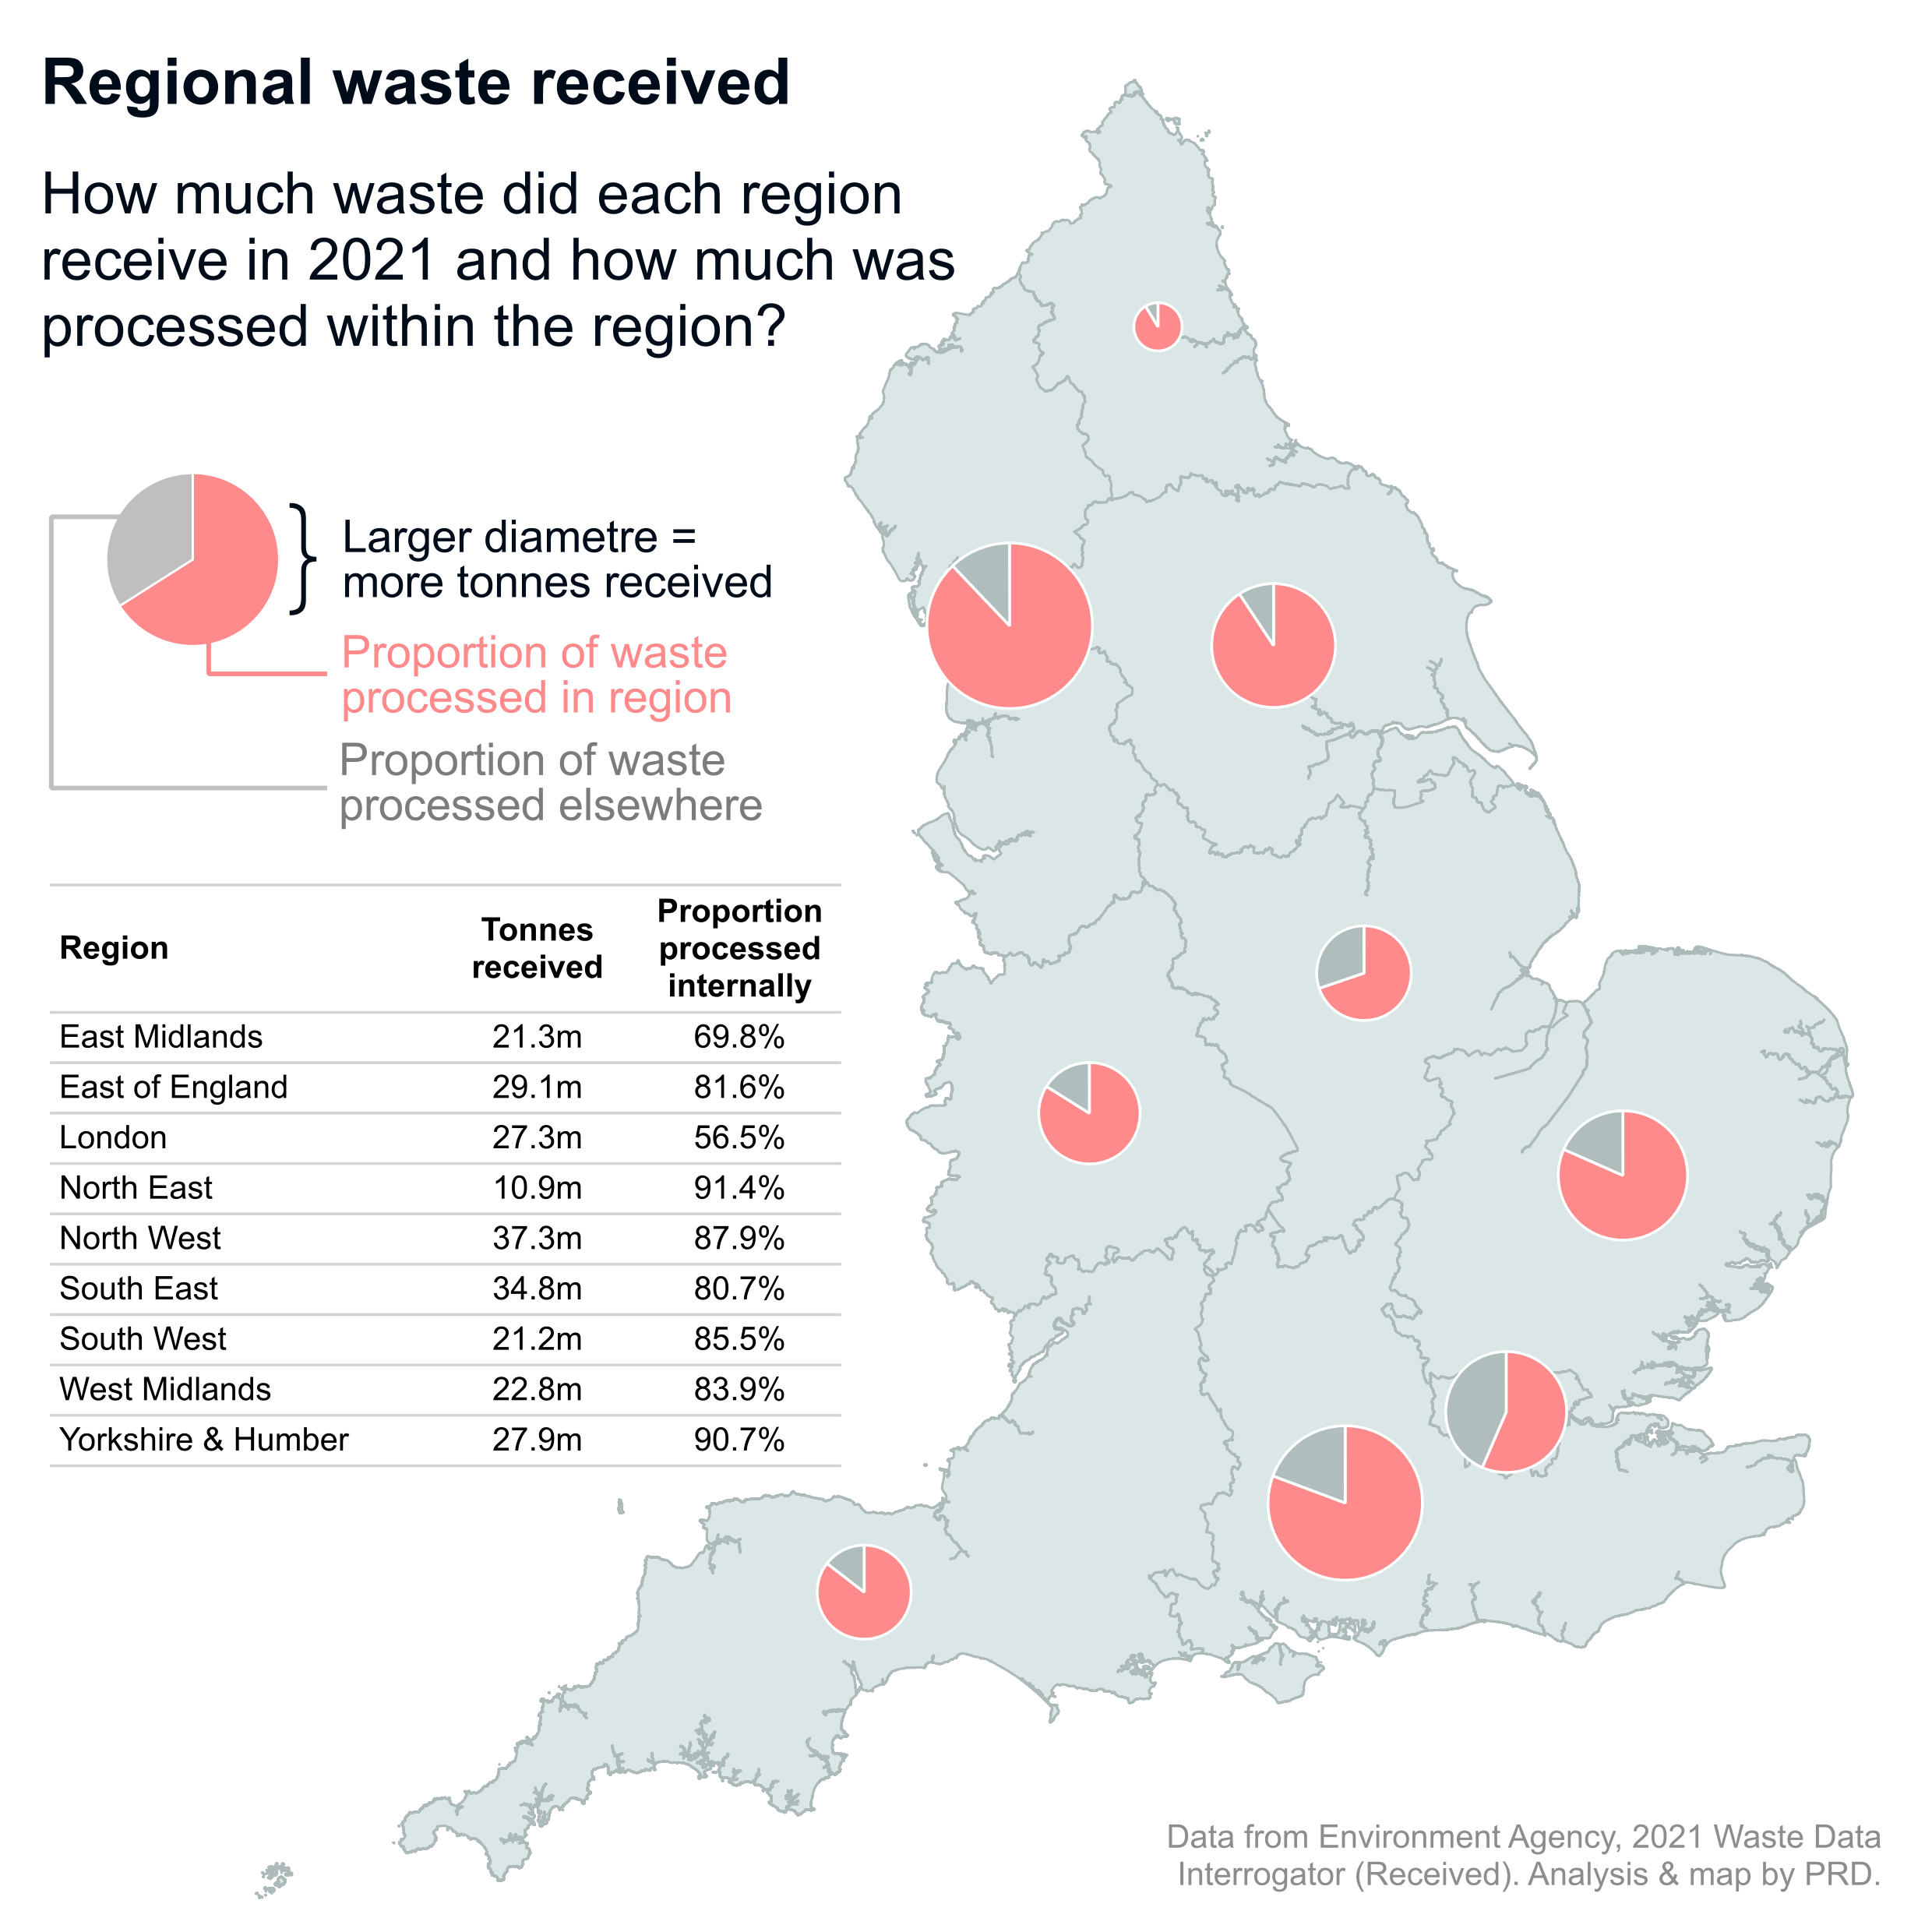 A map showing the amount of waste each English region received in 2021. Pie charts represent the amount of waste each region processed internally vs sent to another region for processing. London received an average amount of waste, but only processed 56% internally.